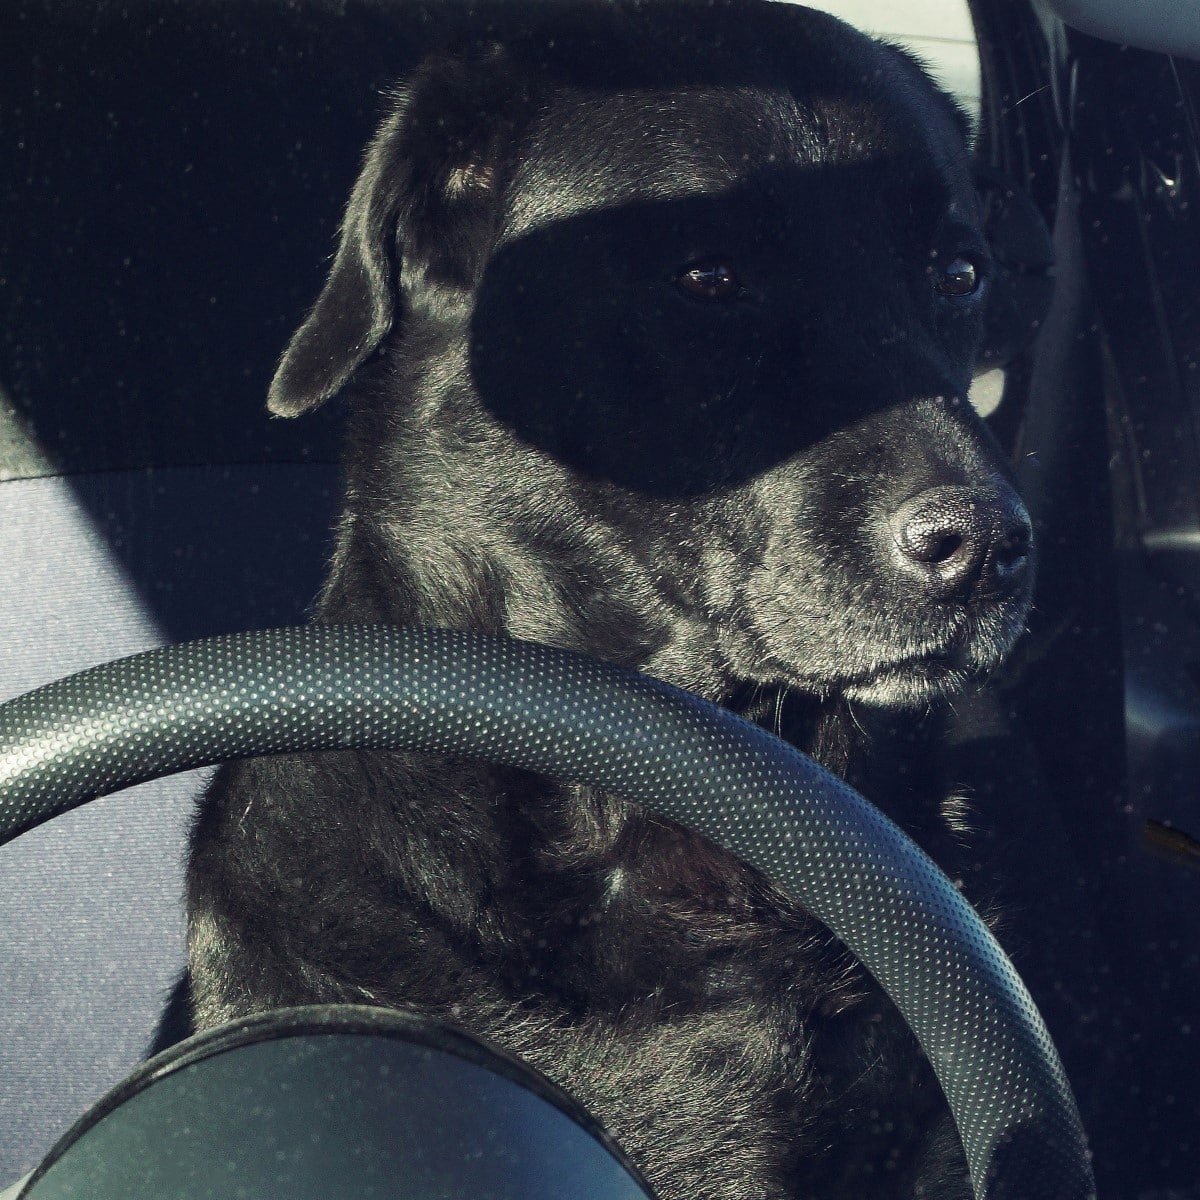 Black lab in a car with shadow on his face that looks like a mask